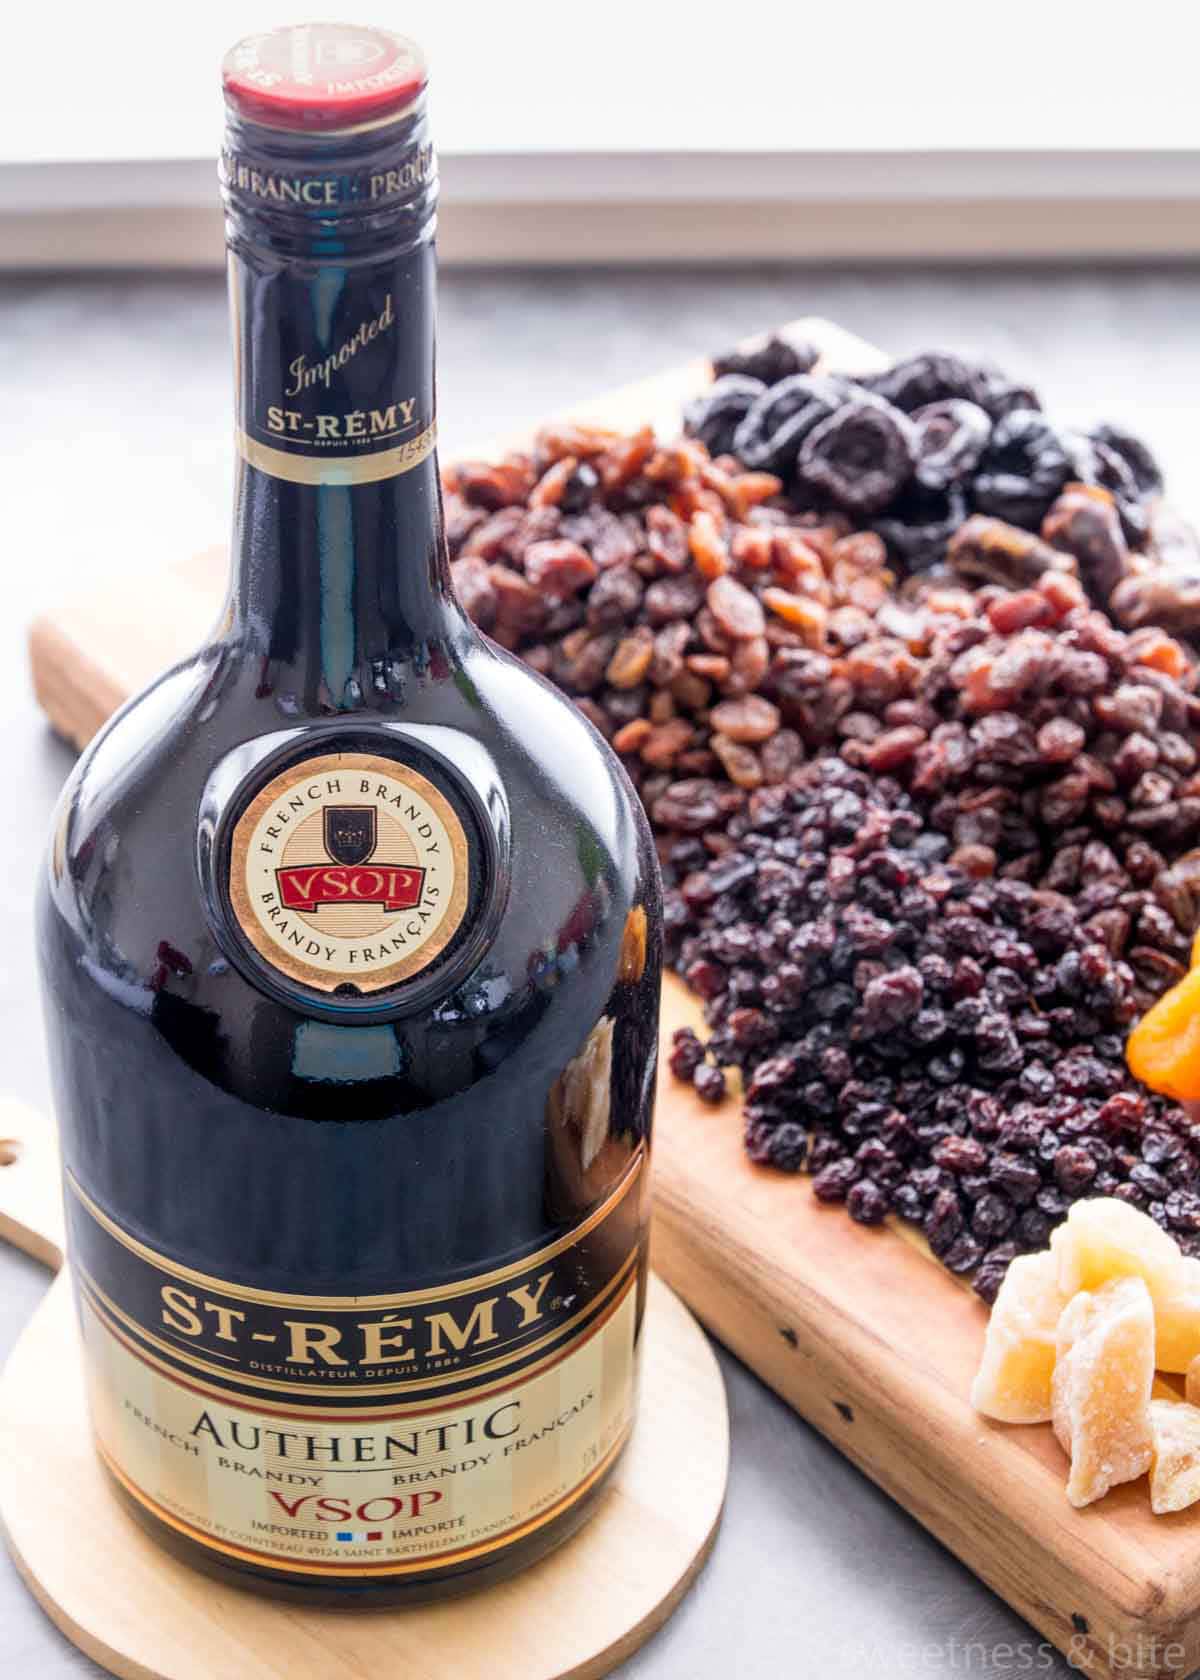 A bottle of St Remy brandy with dried fruits in the background.